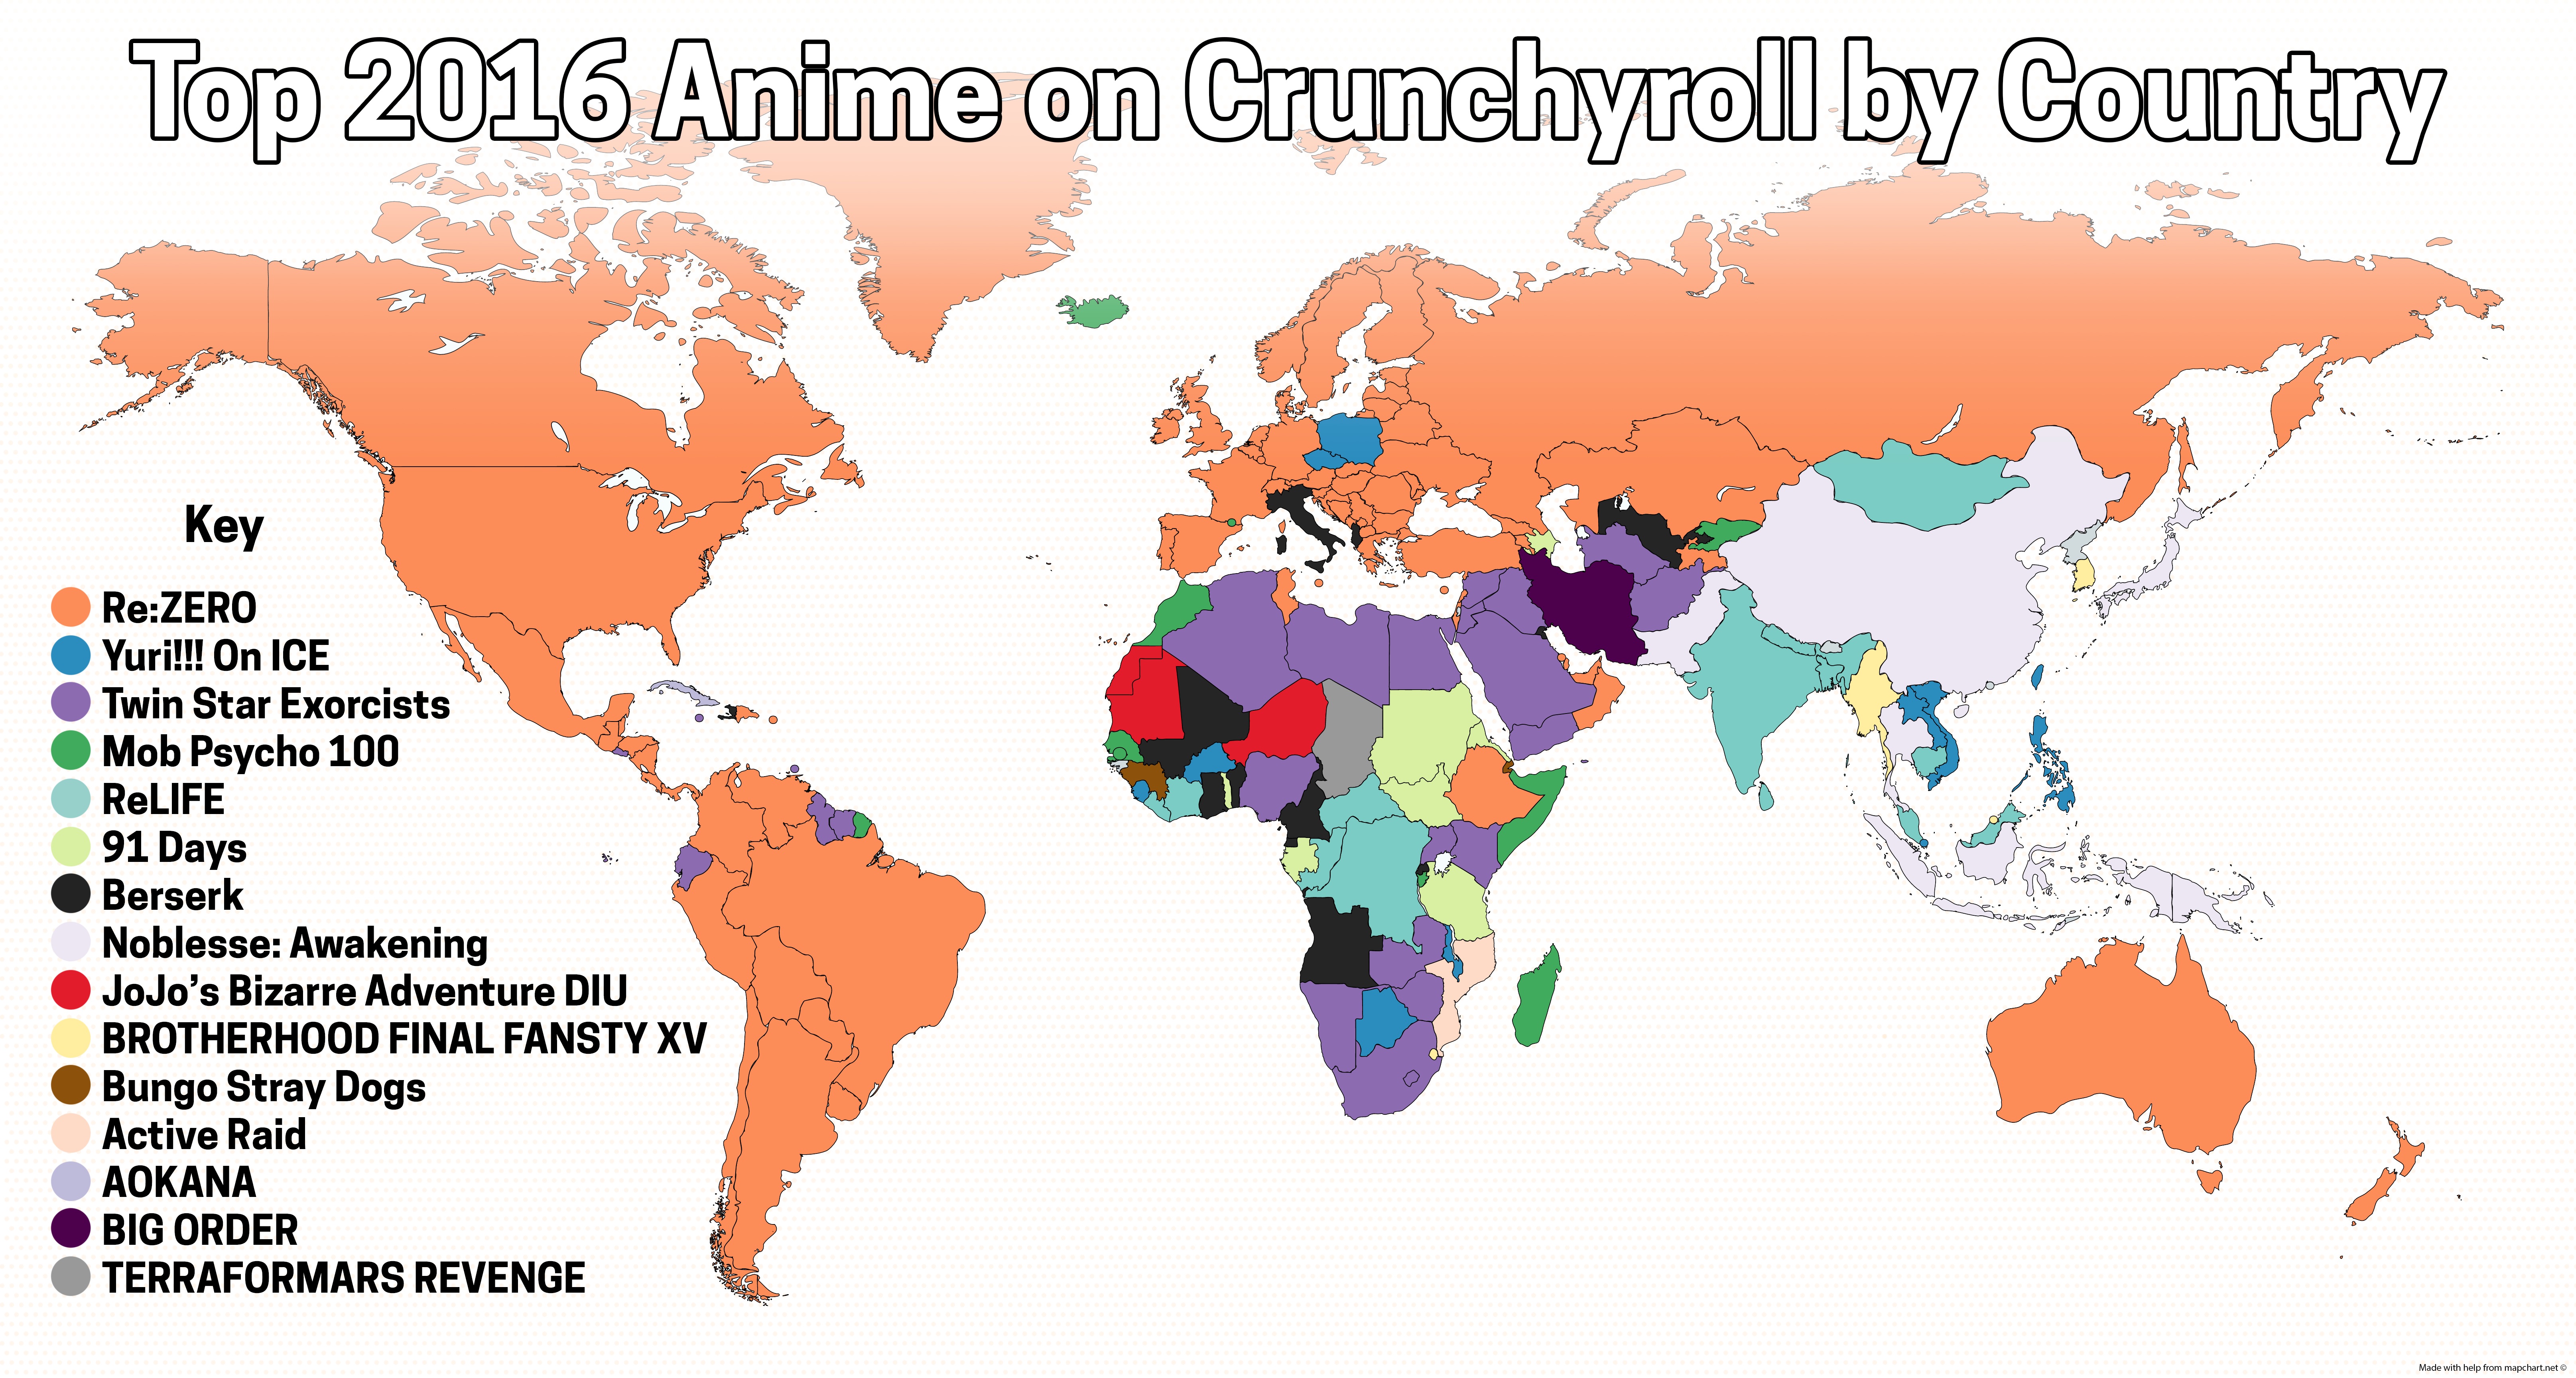 Crunchyroll - FEATURE: Crunchyroll's Most Popular Anime of 2016 by Country!